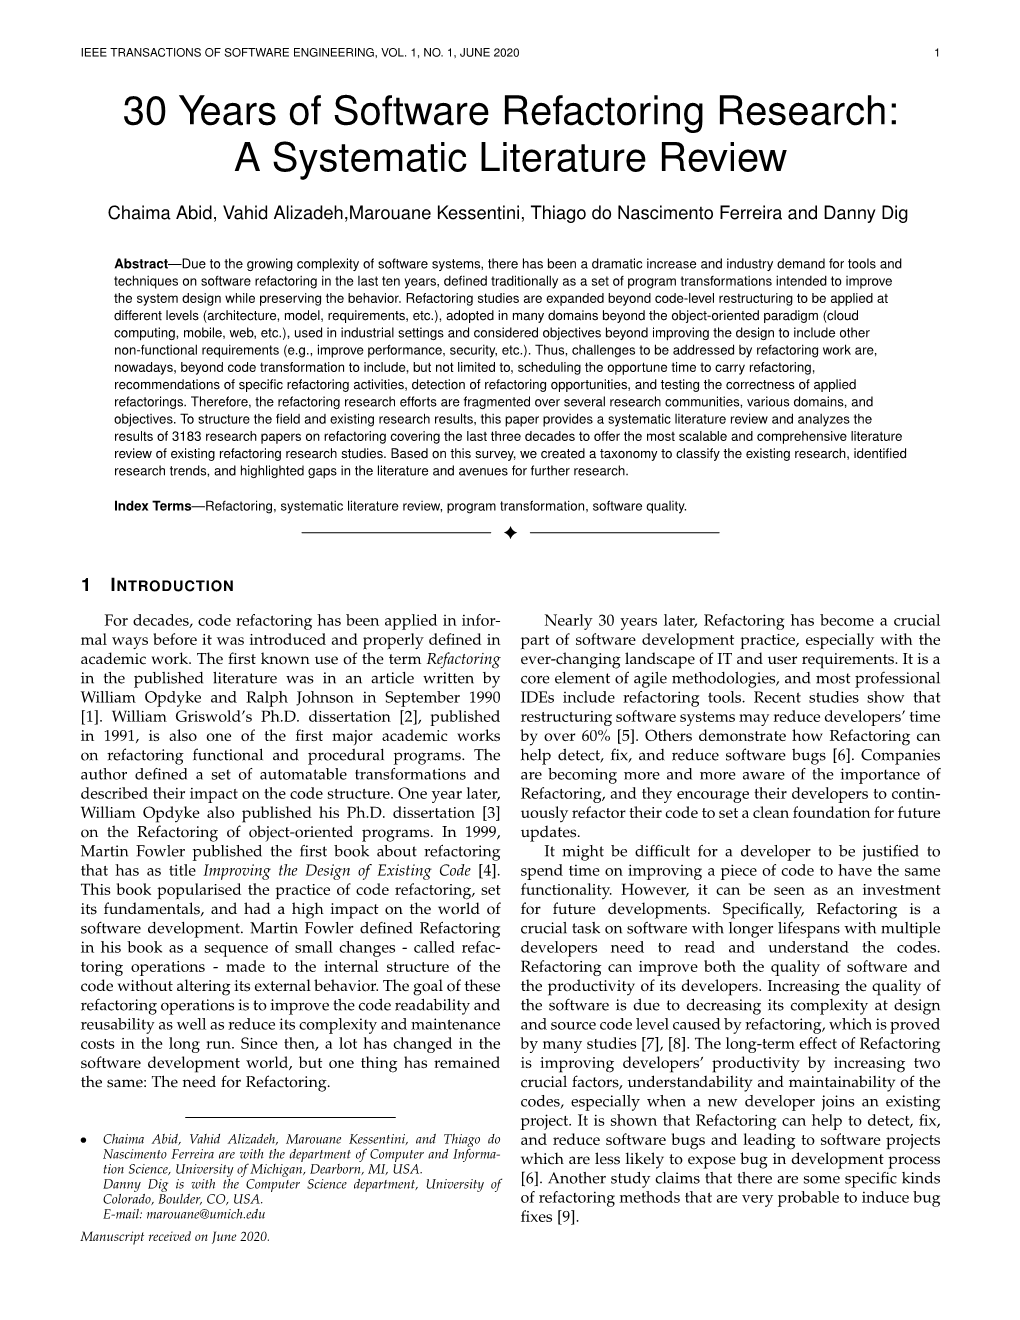 30 Years of Software Refactoring Research: a Systematic Literature Review